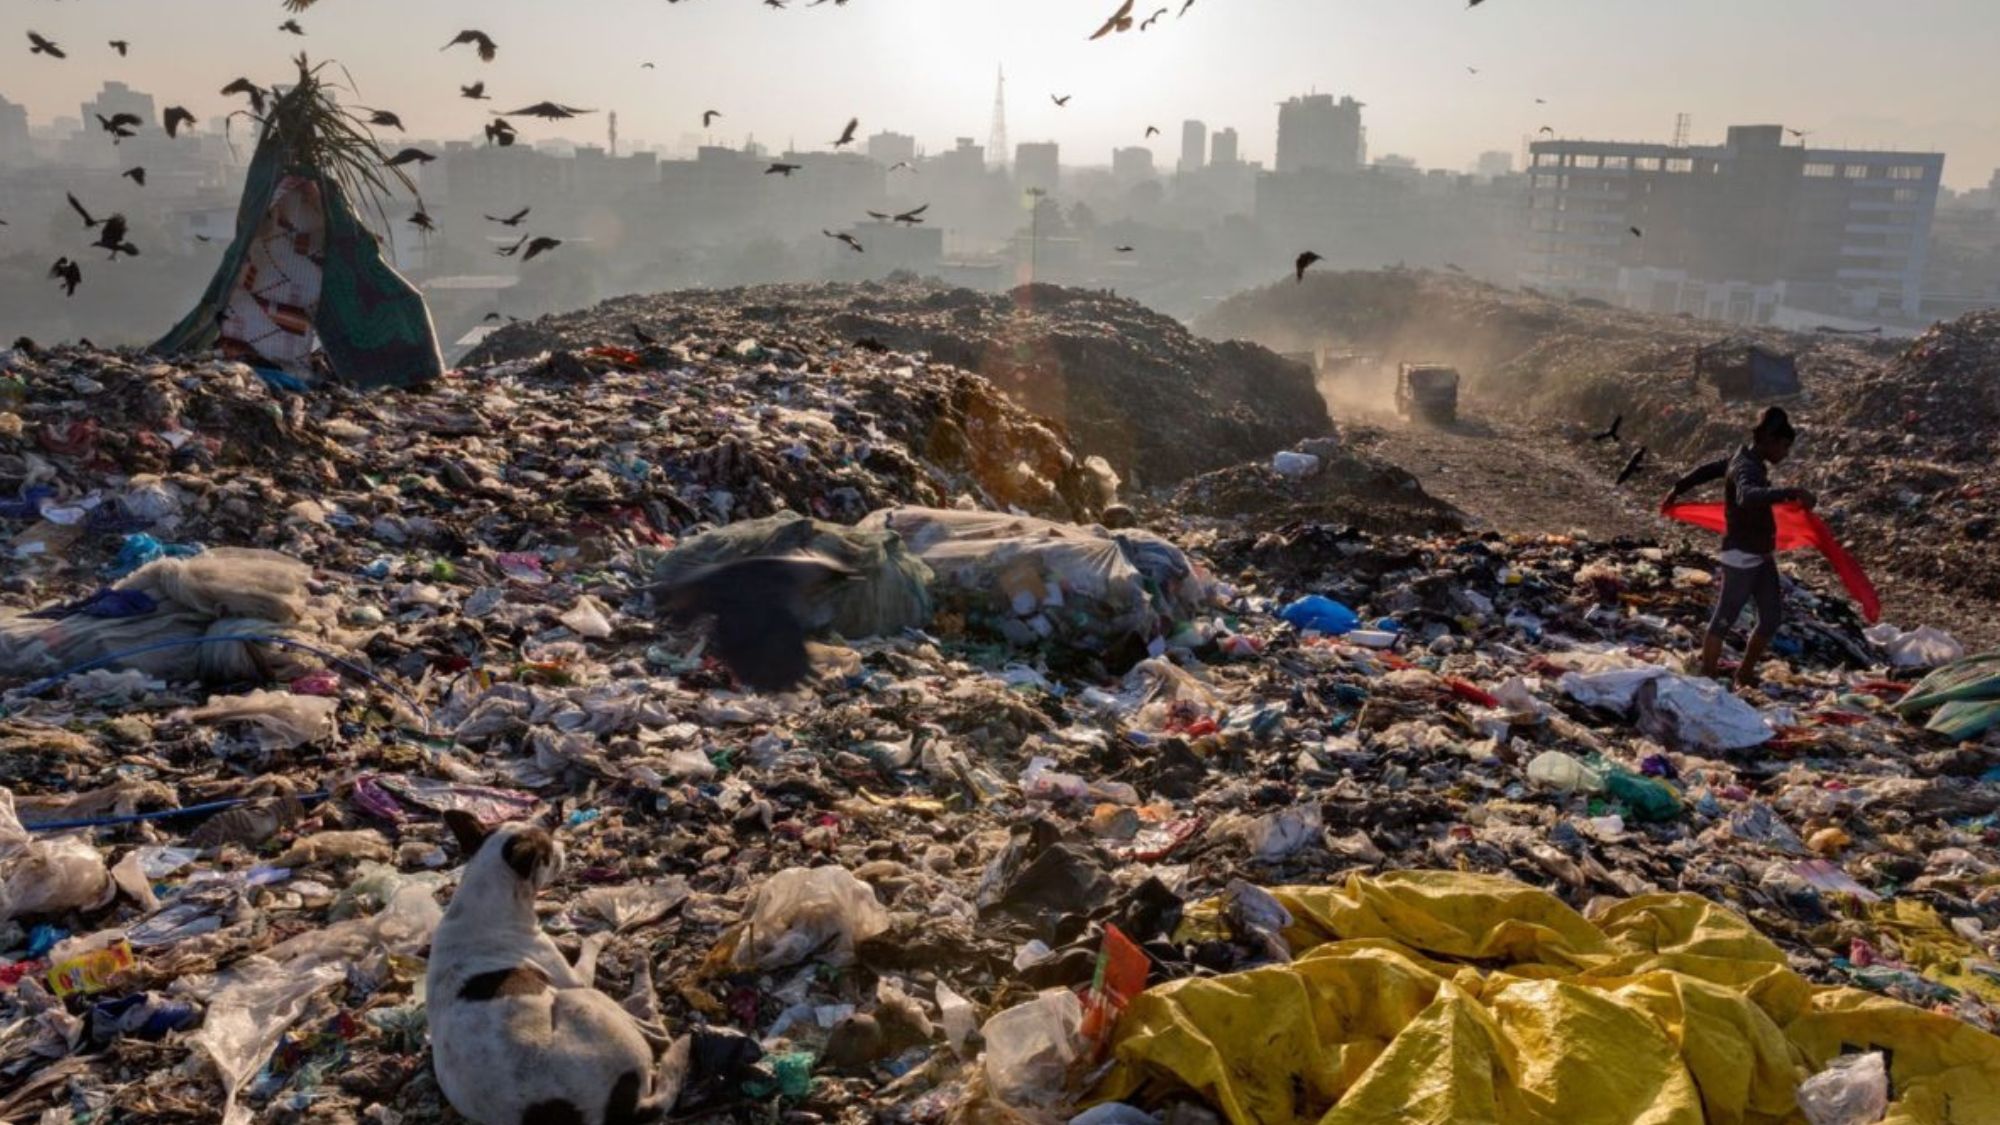 A landfill of waste showing devastating effects of waste on our environment